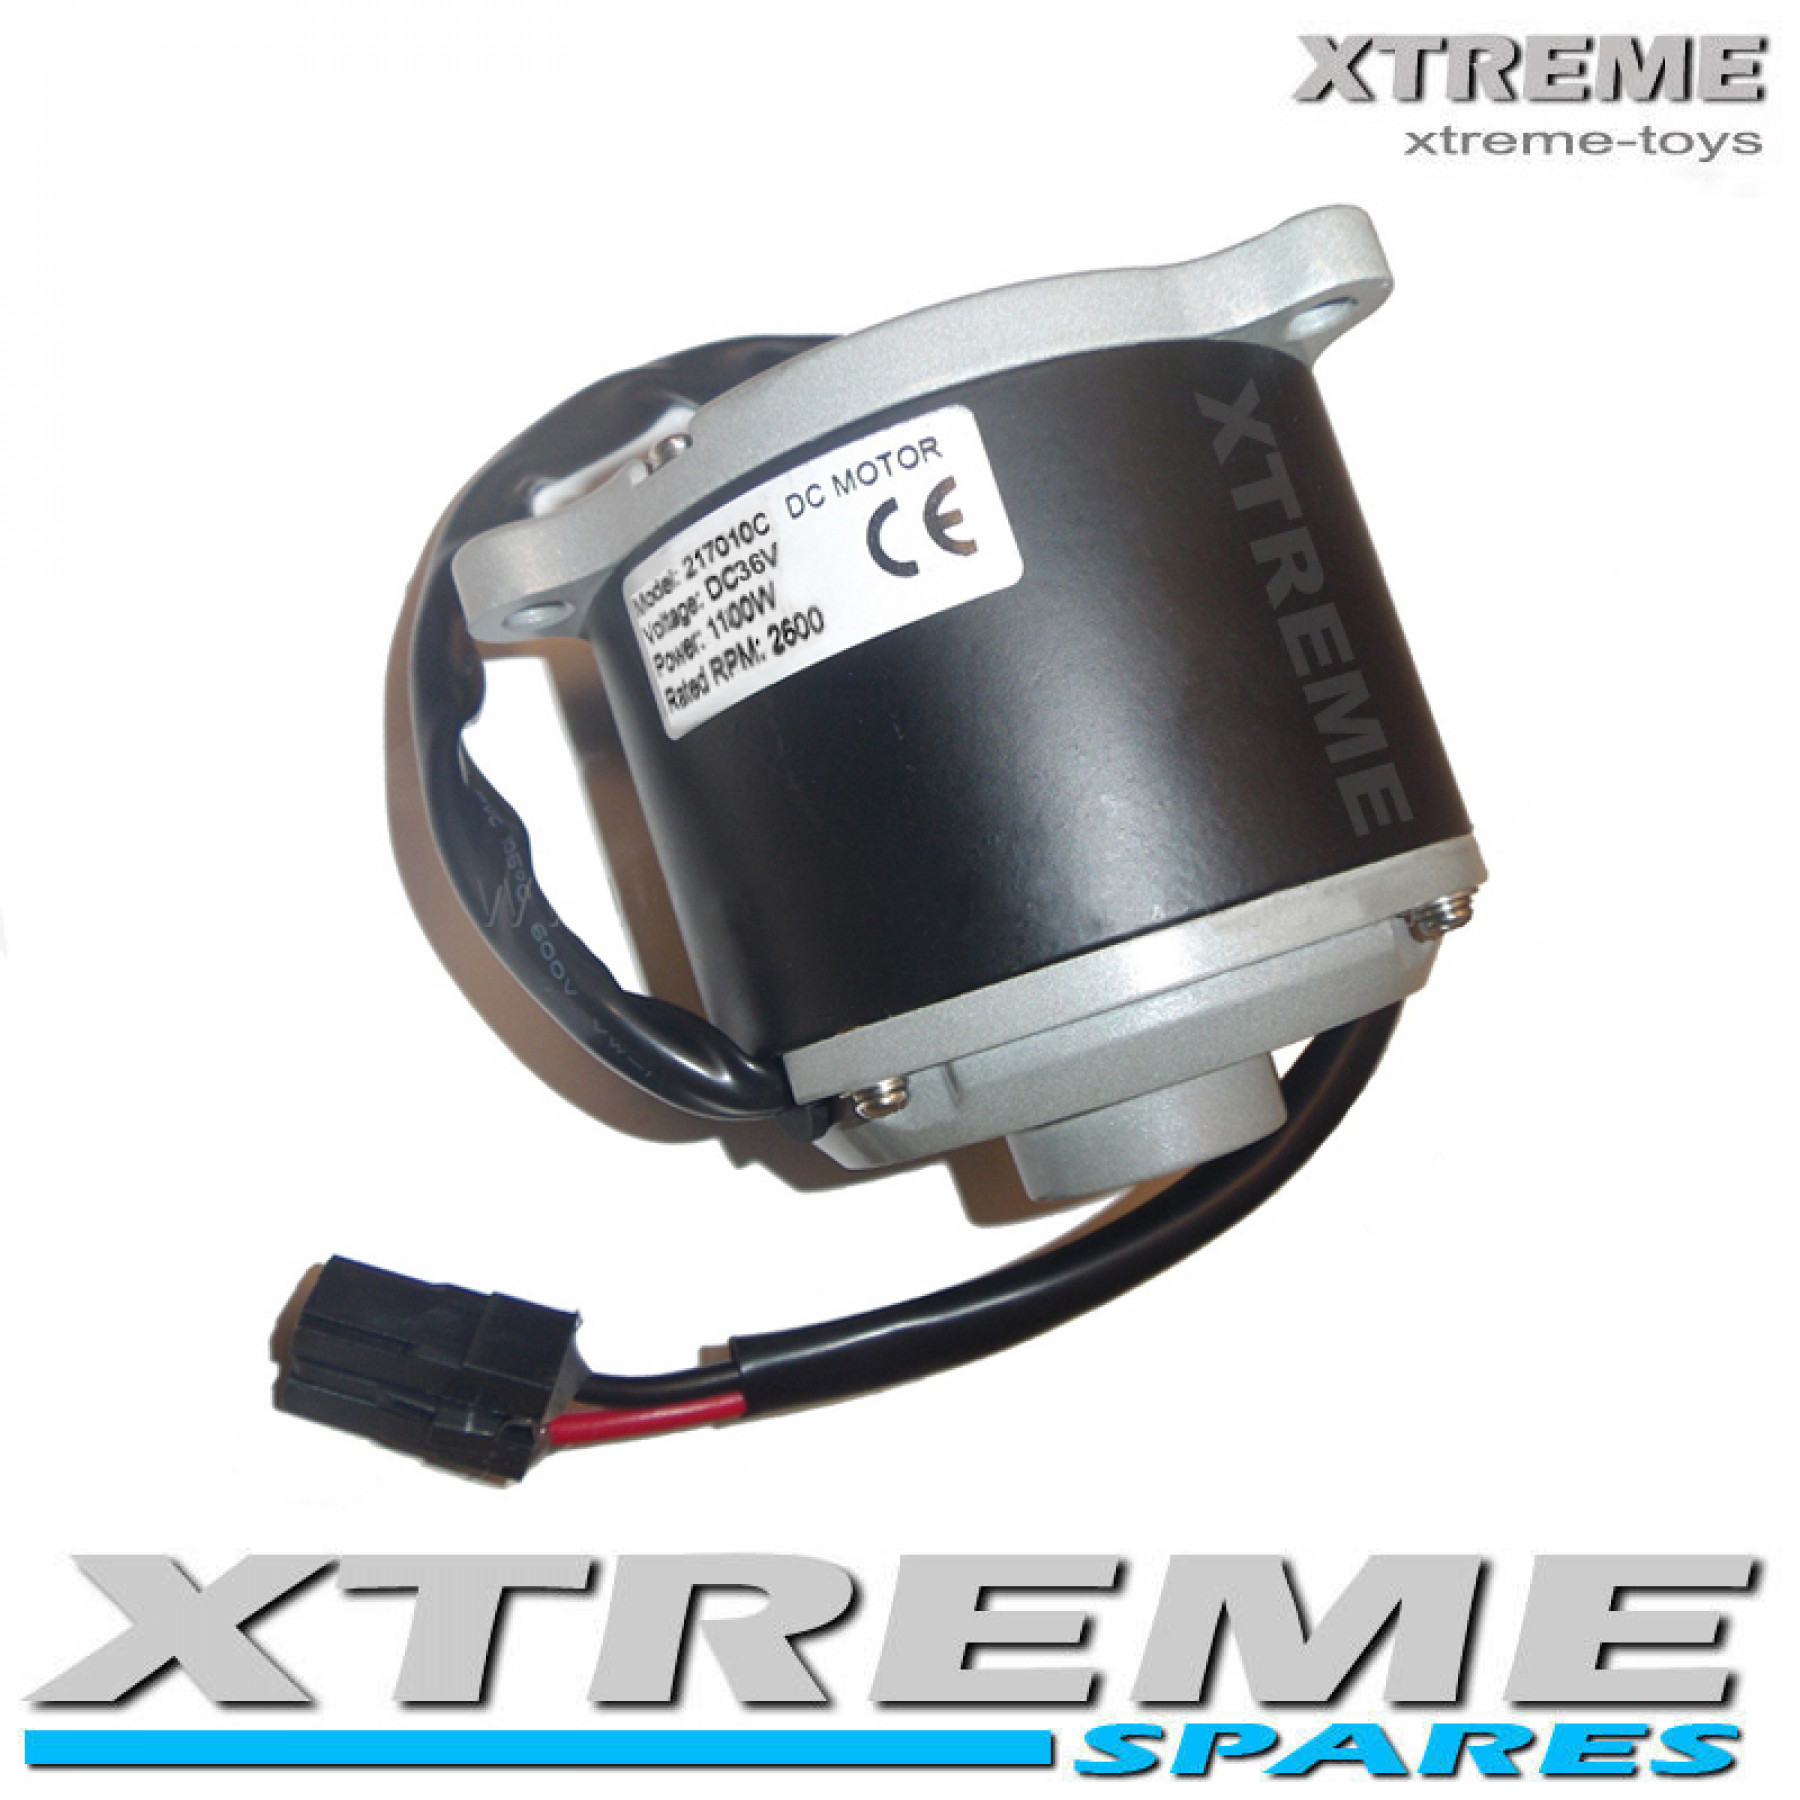 XTREME ELECTRIC XTM MX-PRO 36V 1100W REPLACEMENT MOTOR